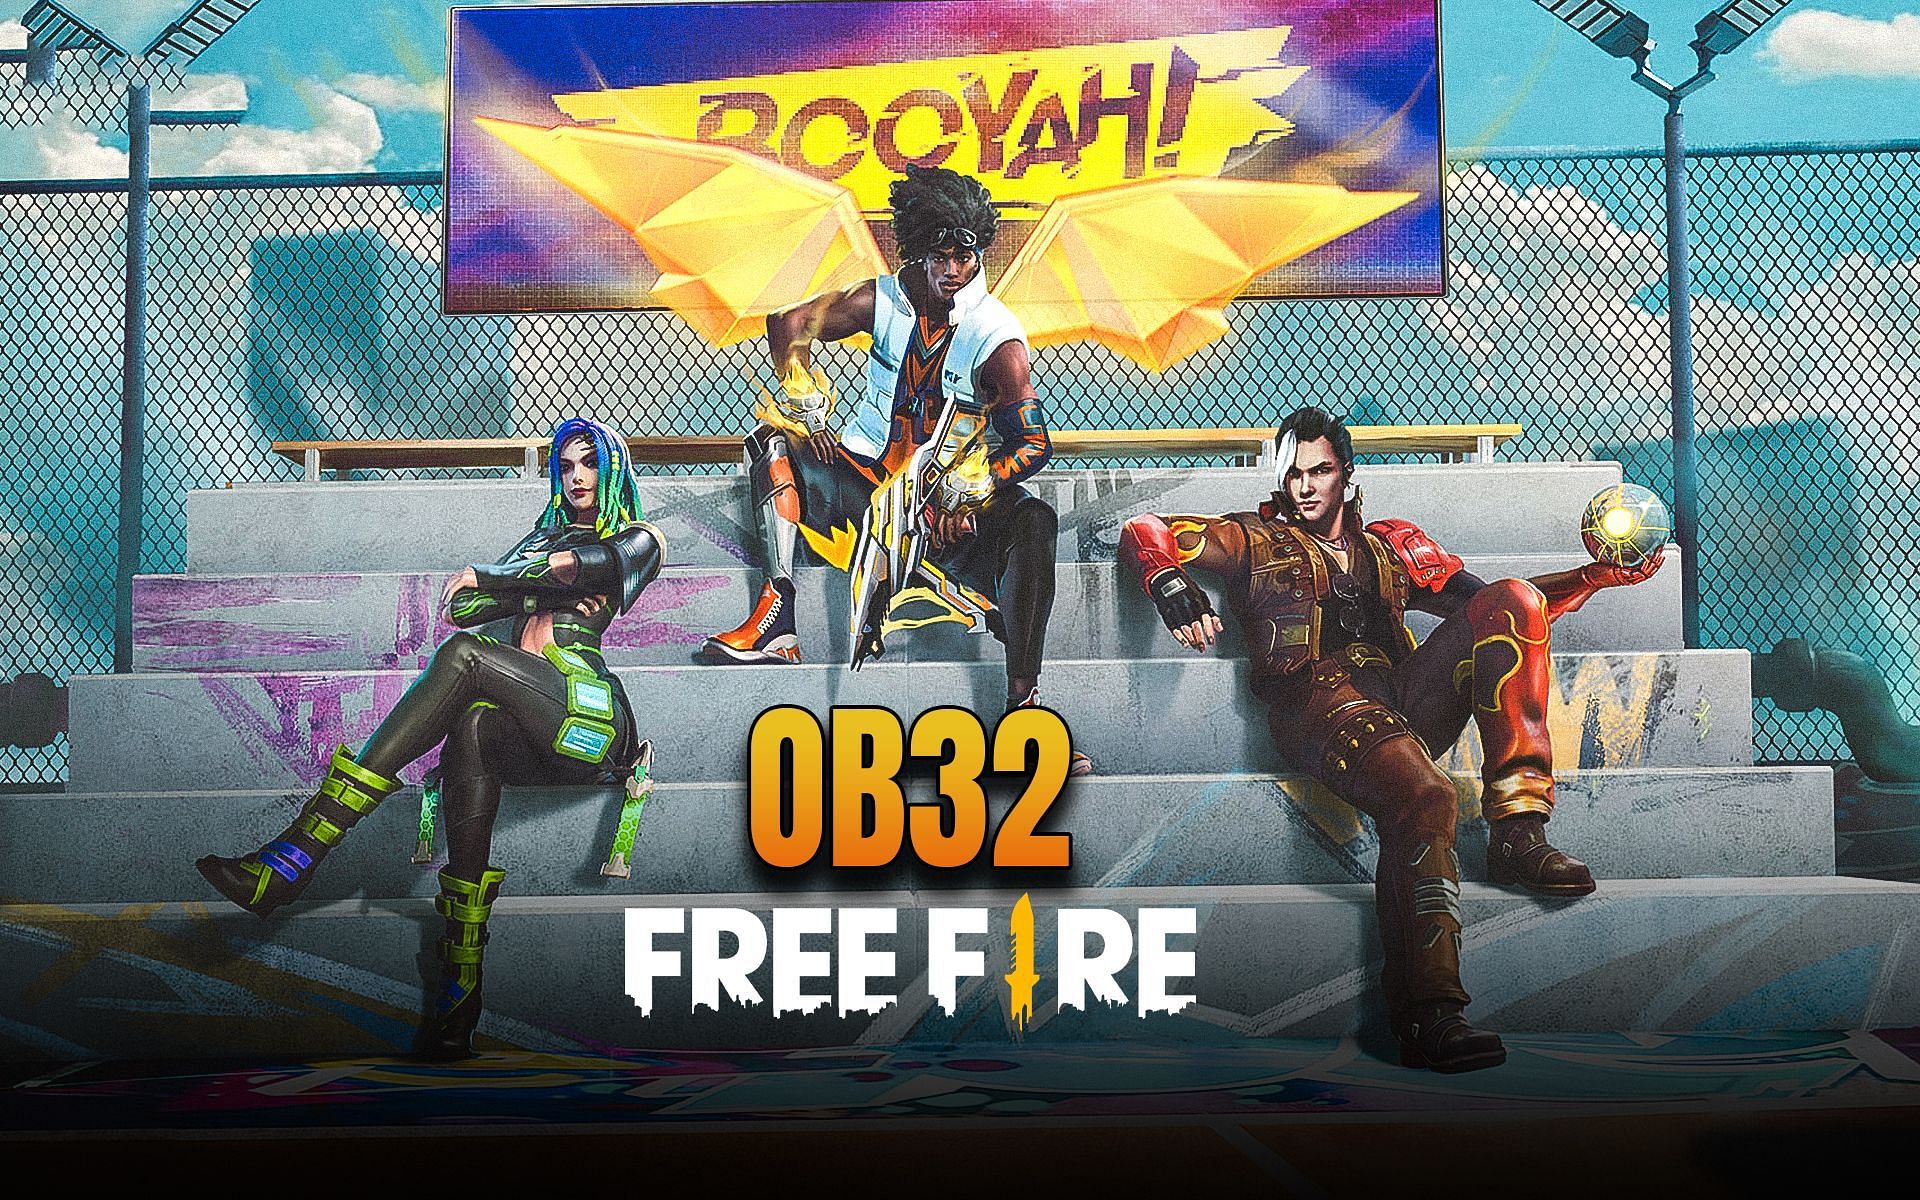 OB32 expected release date (Image via Free Fire)